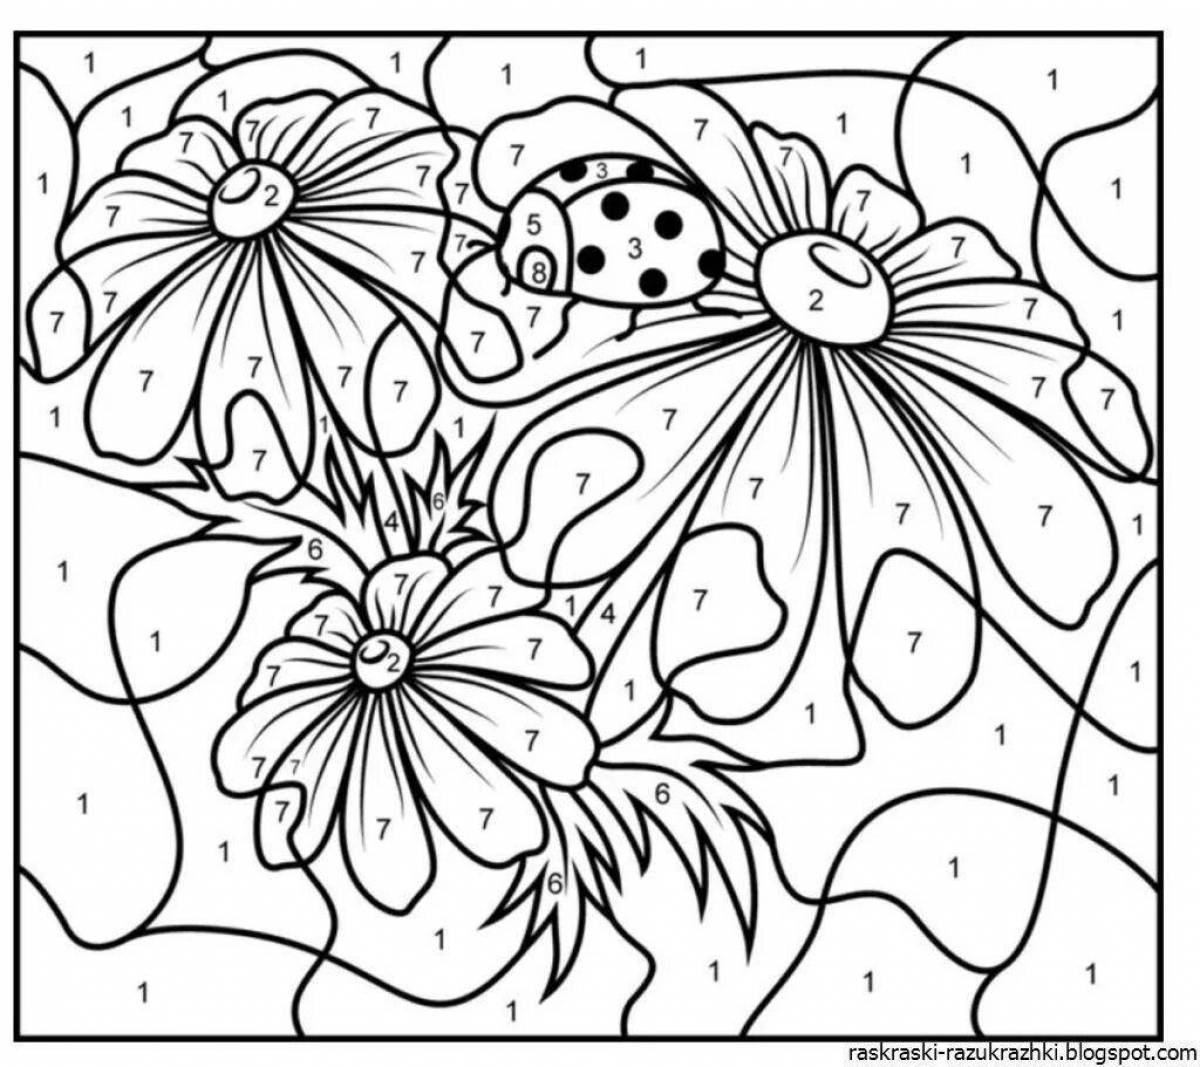 Fun coloring by numbers 18